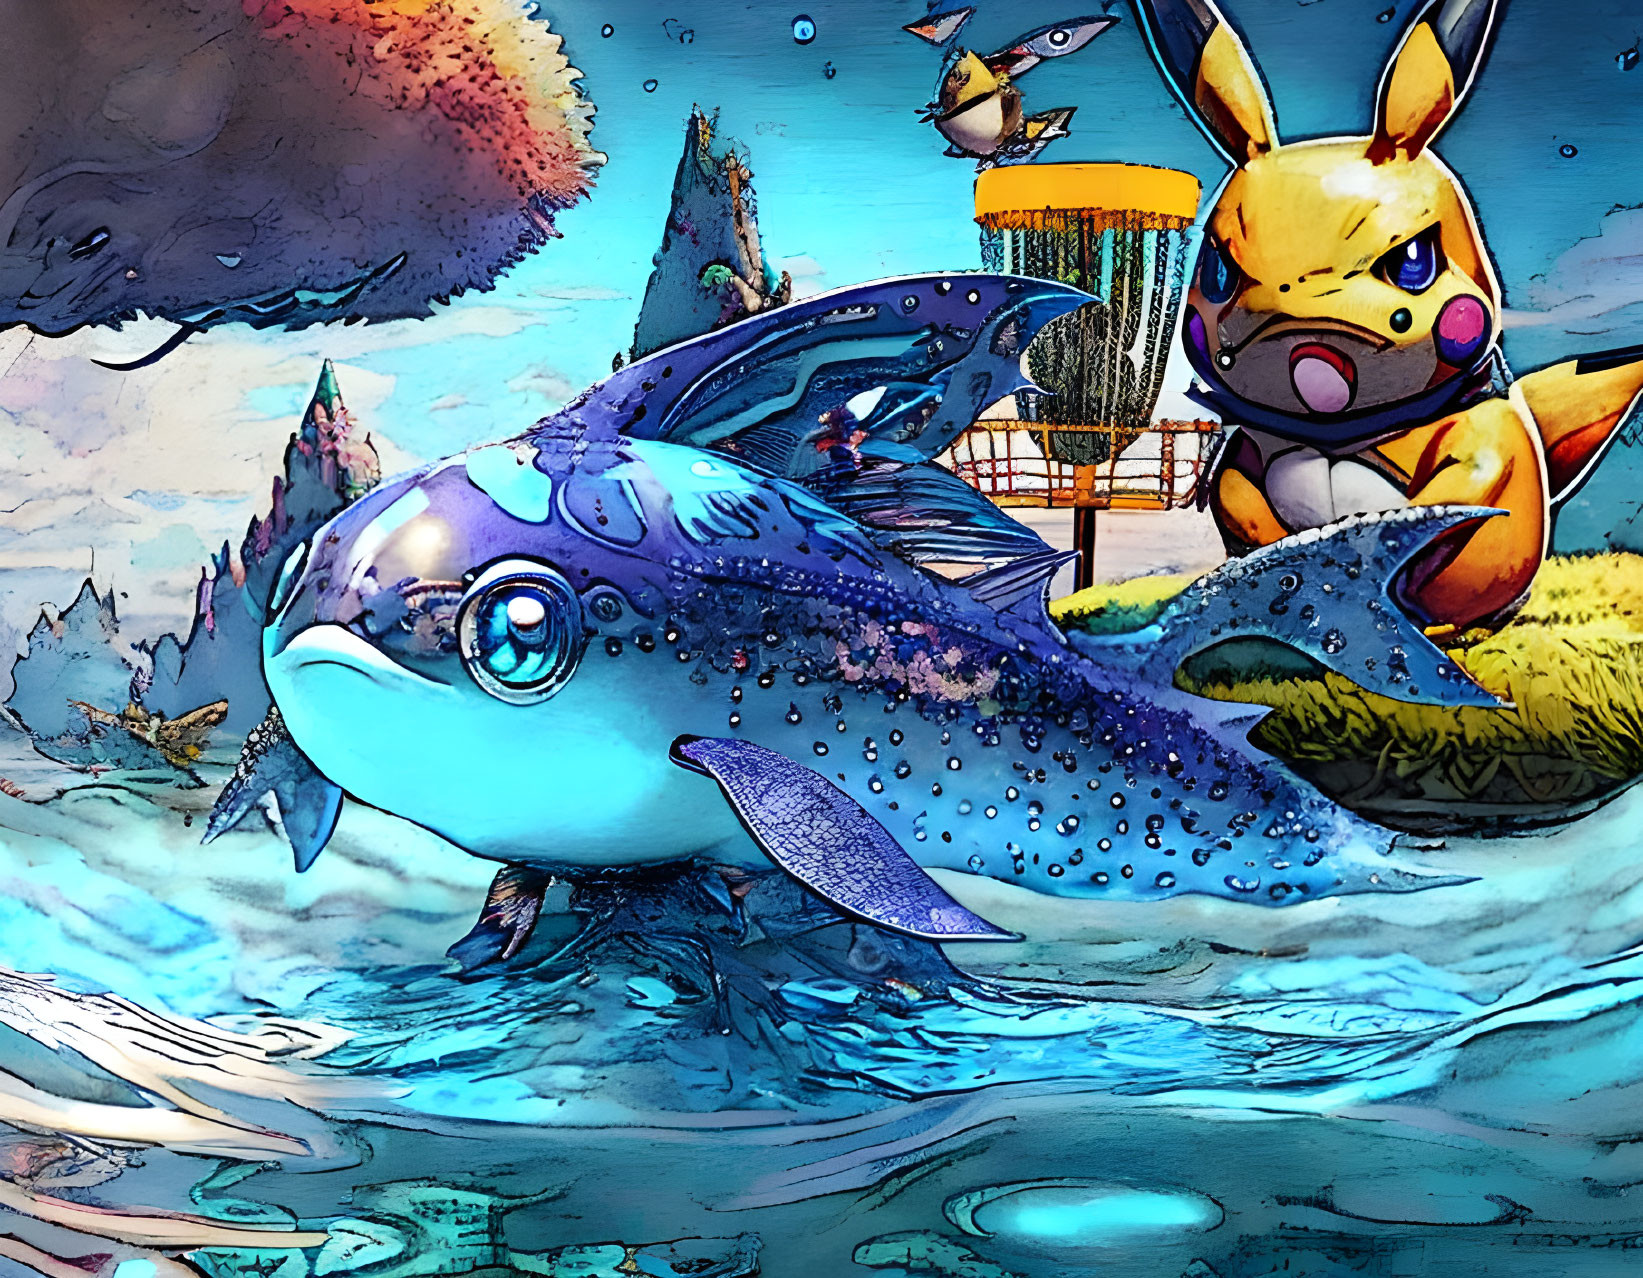 Colorful underwater scene with blue fish and yellow character